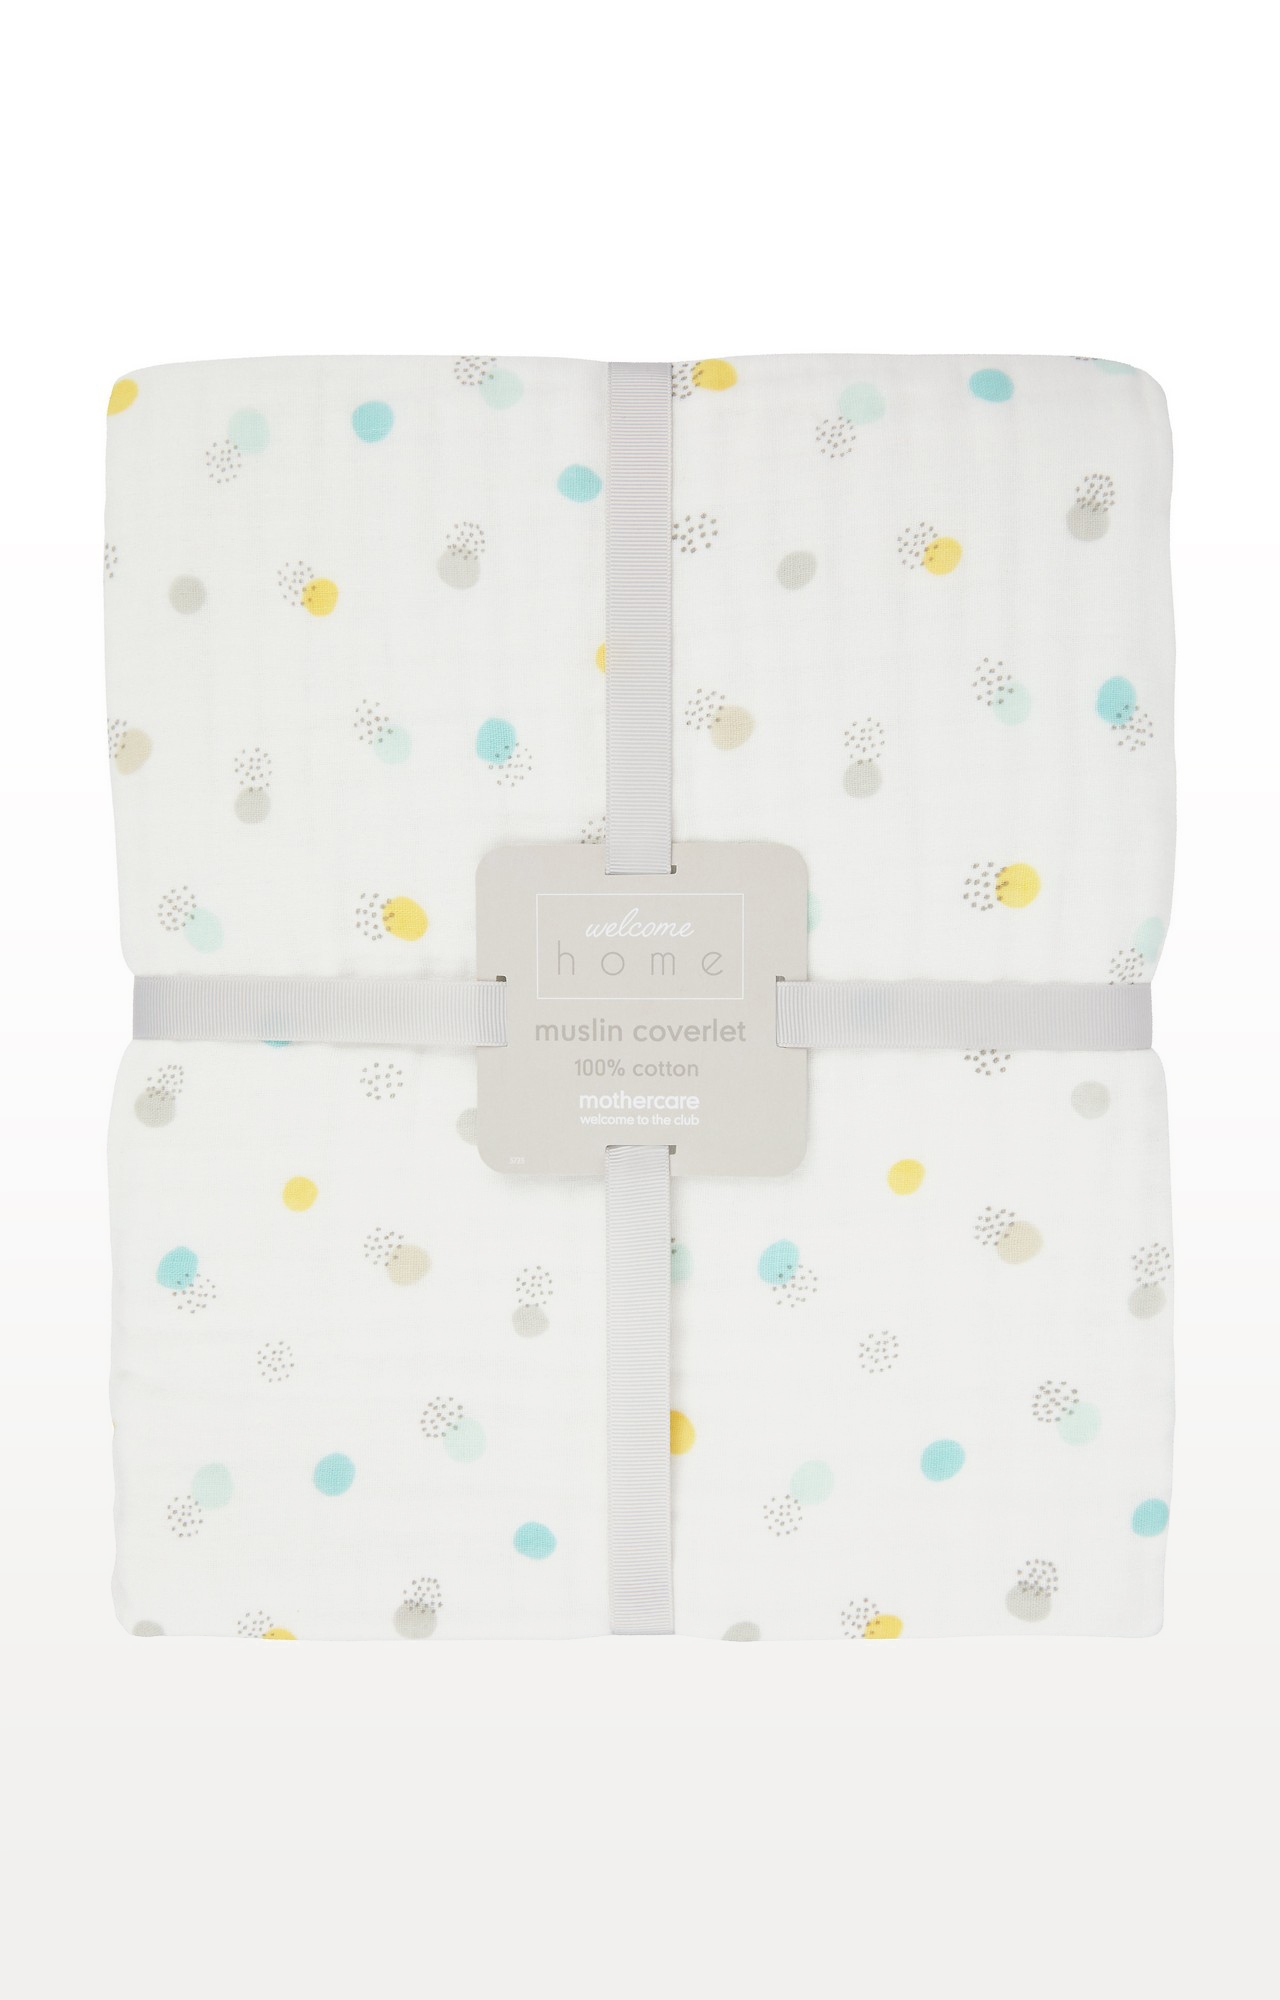 Mothercare | Mint Welcome Home Muslin Coverlet or Blanket 1